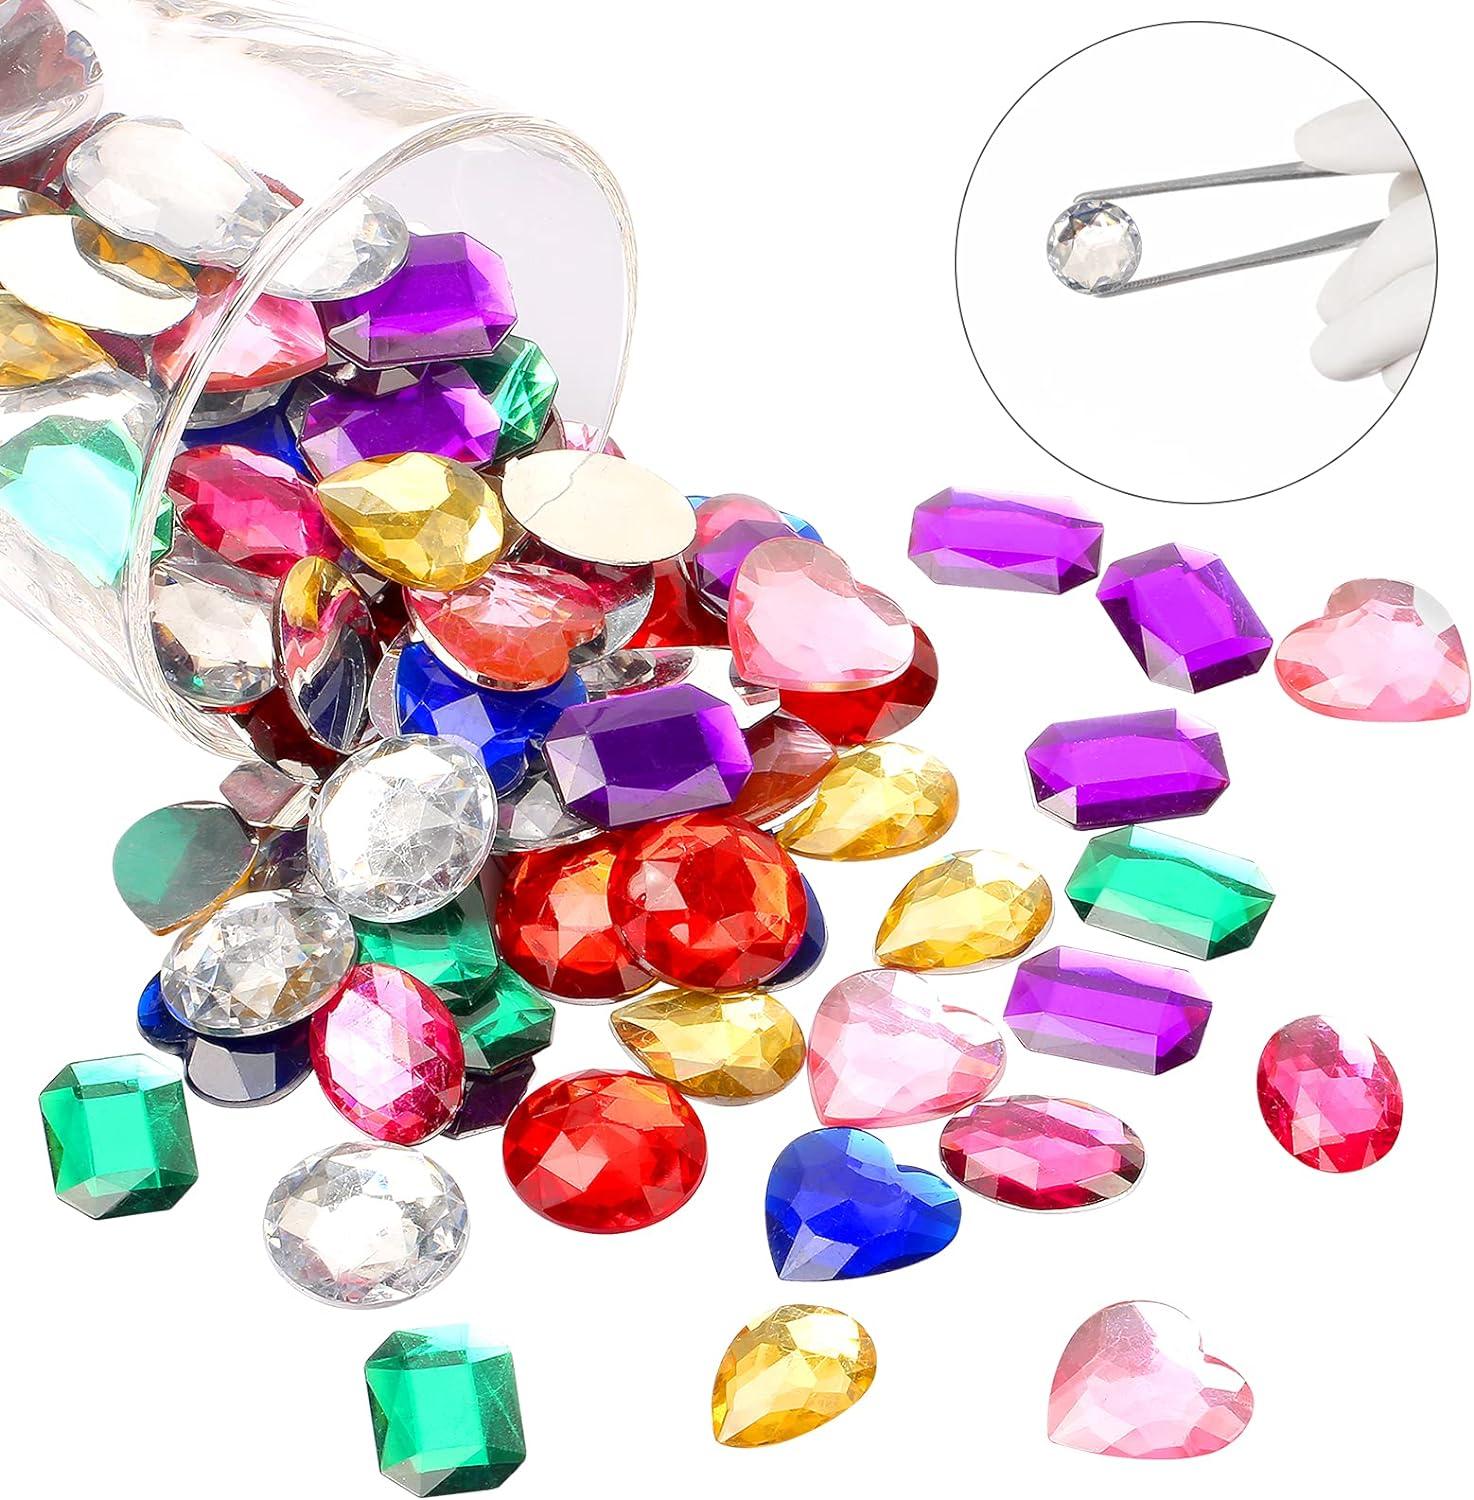 1 Jewels for Crafting Assorted Colorful Flat Back Heart Shaped